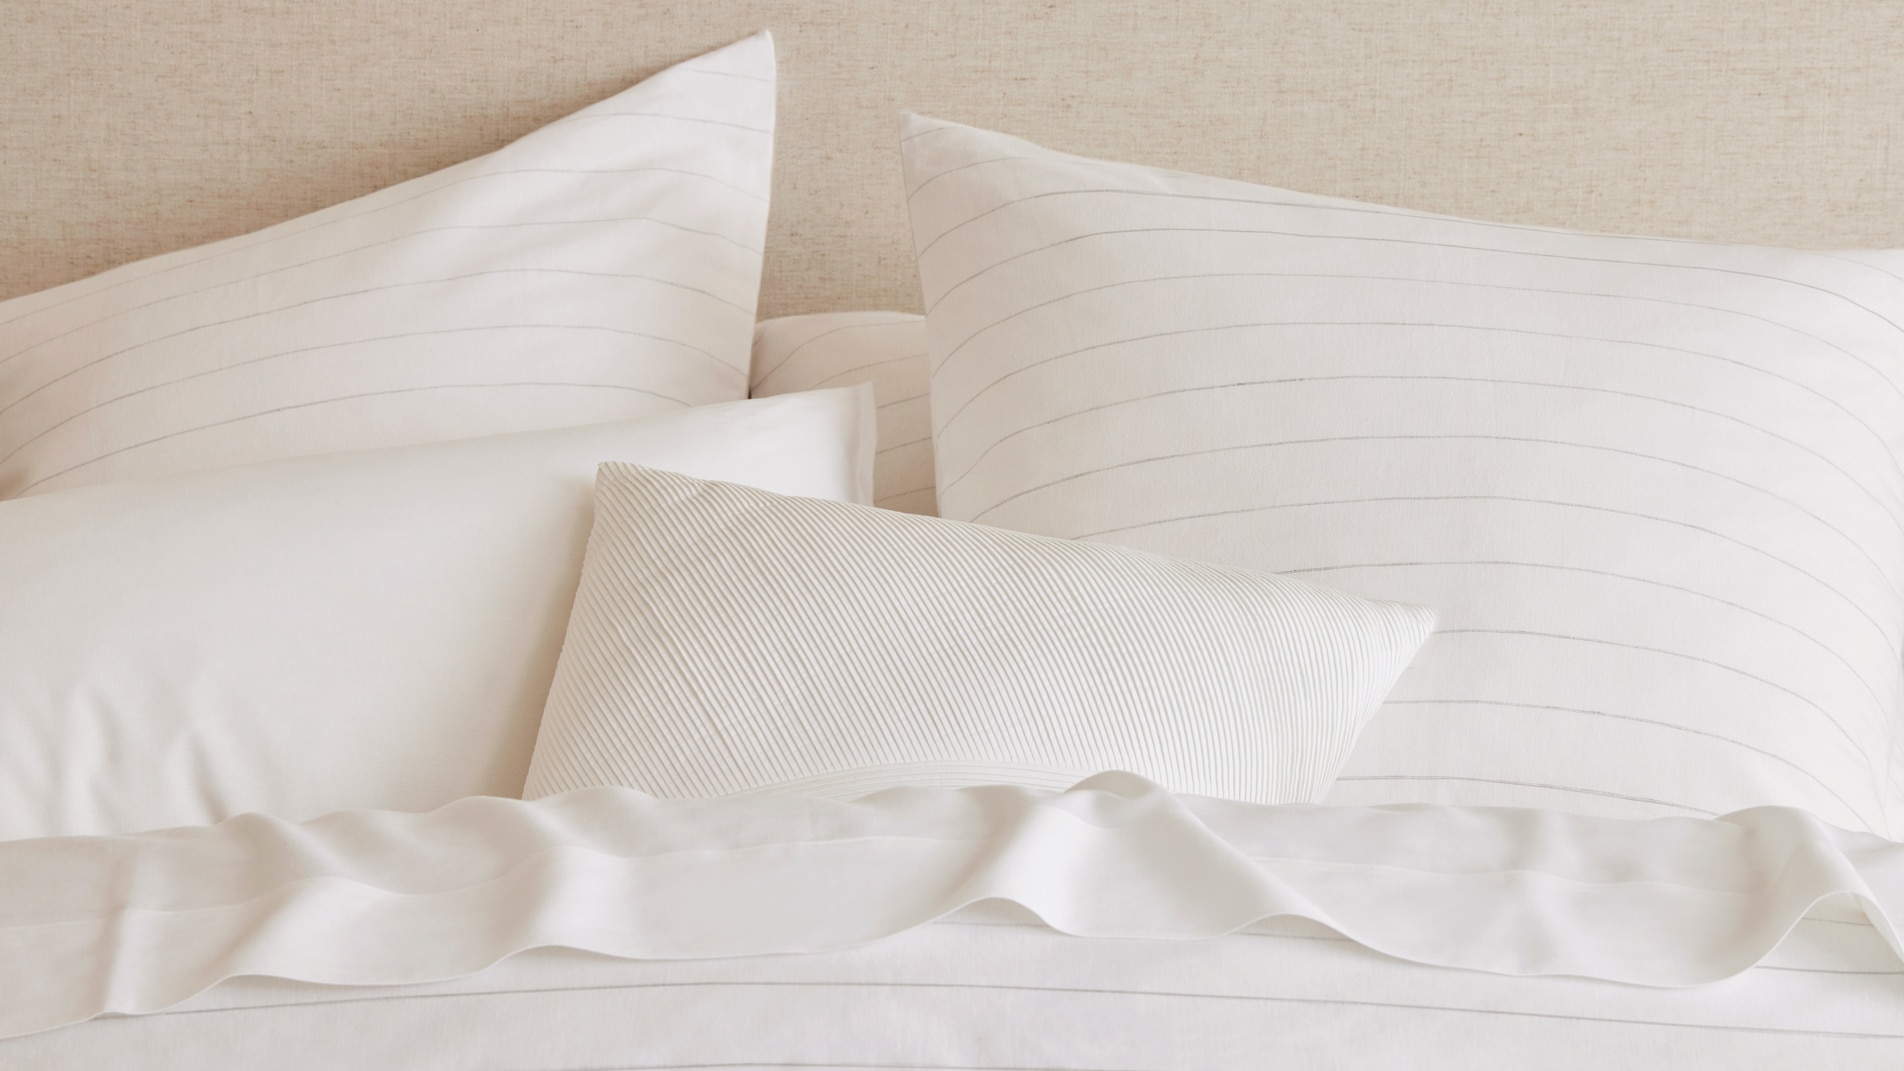 A close up image of layered white pillows and cushions